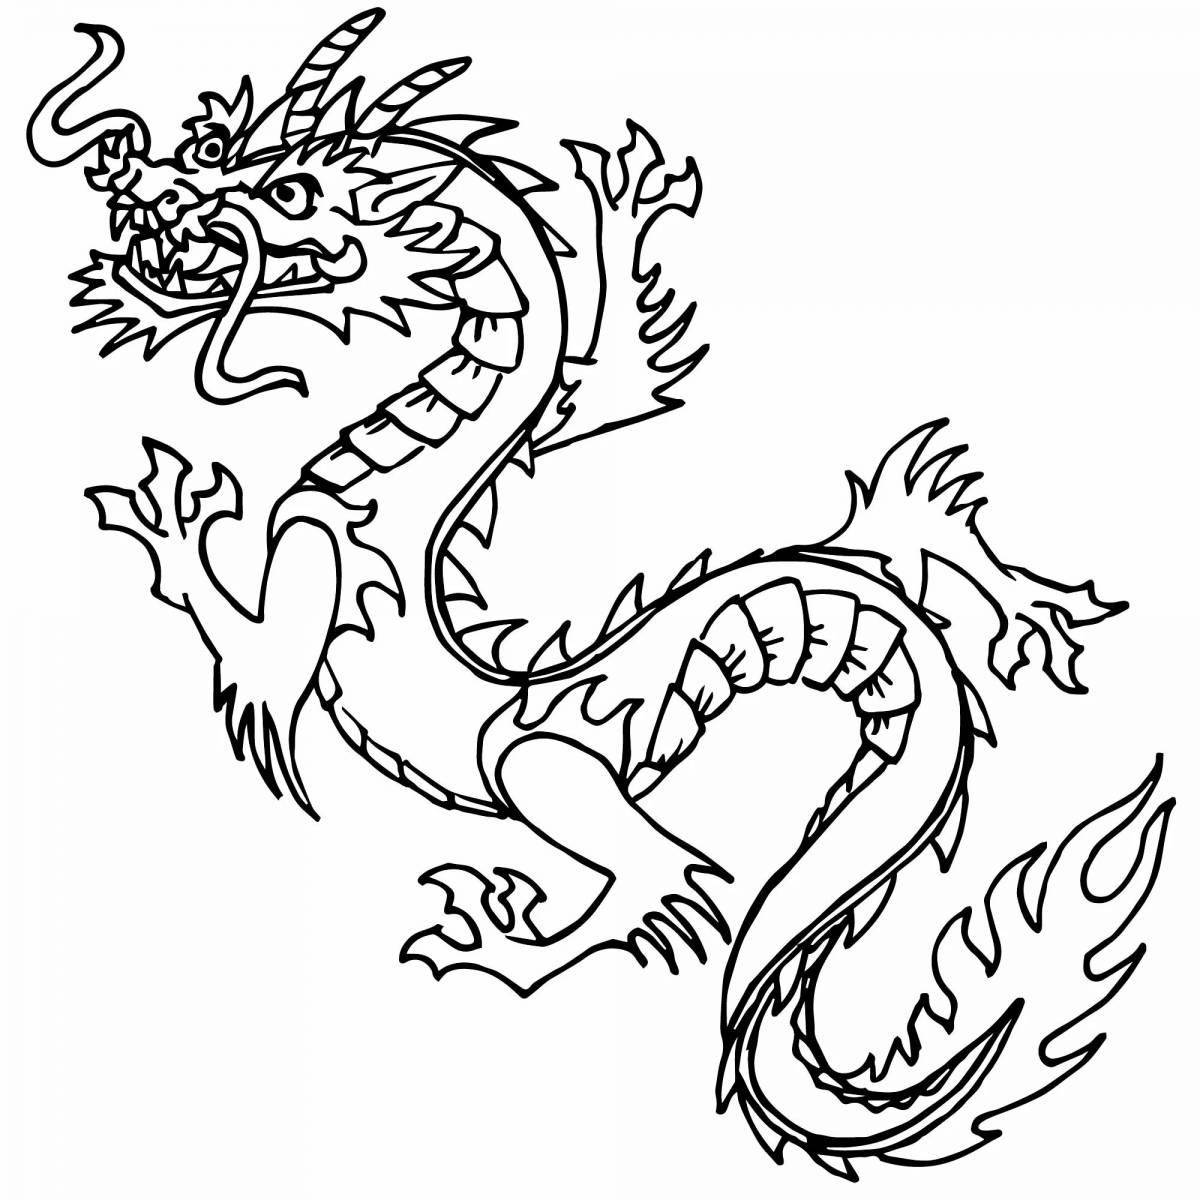 Colorful Chinese dragon coloring book for kids